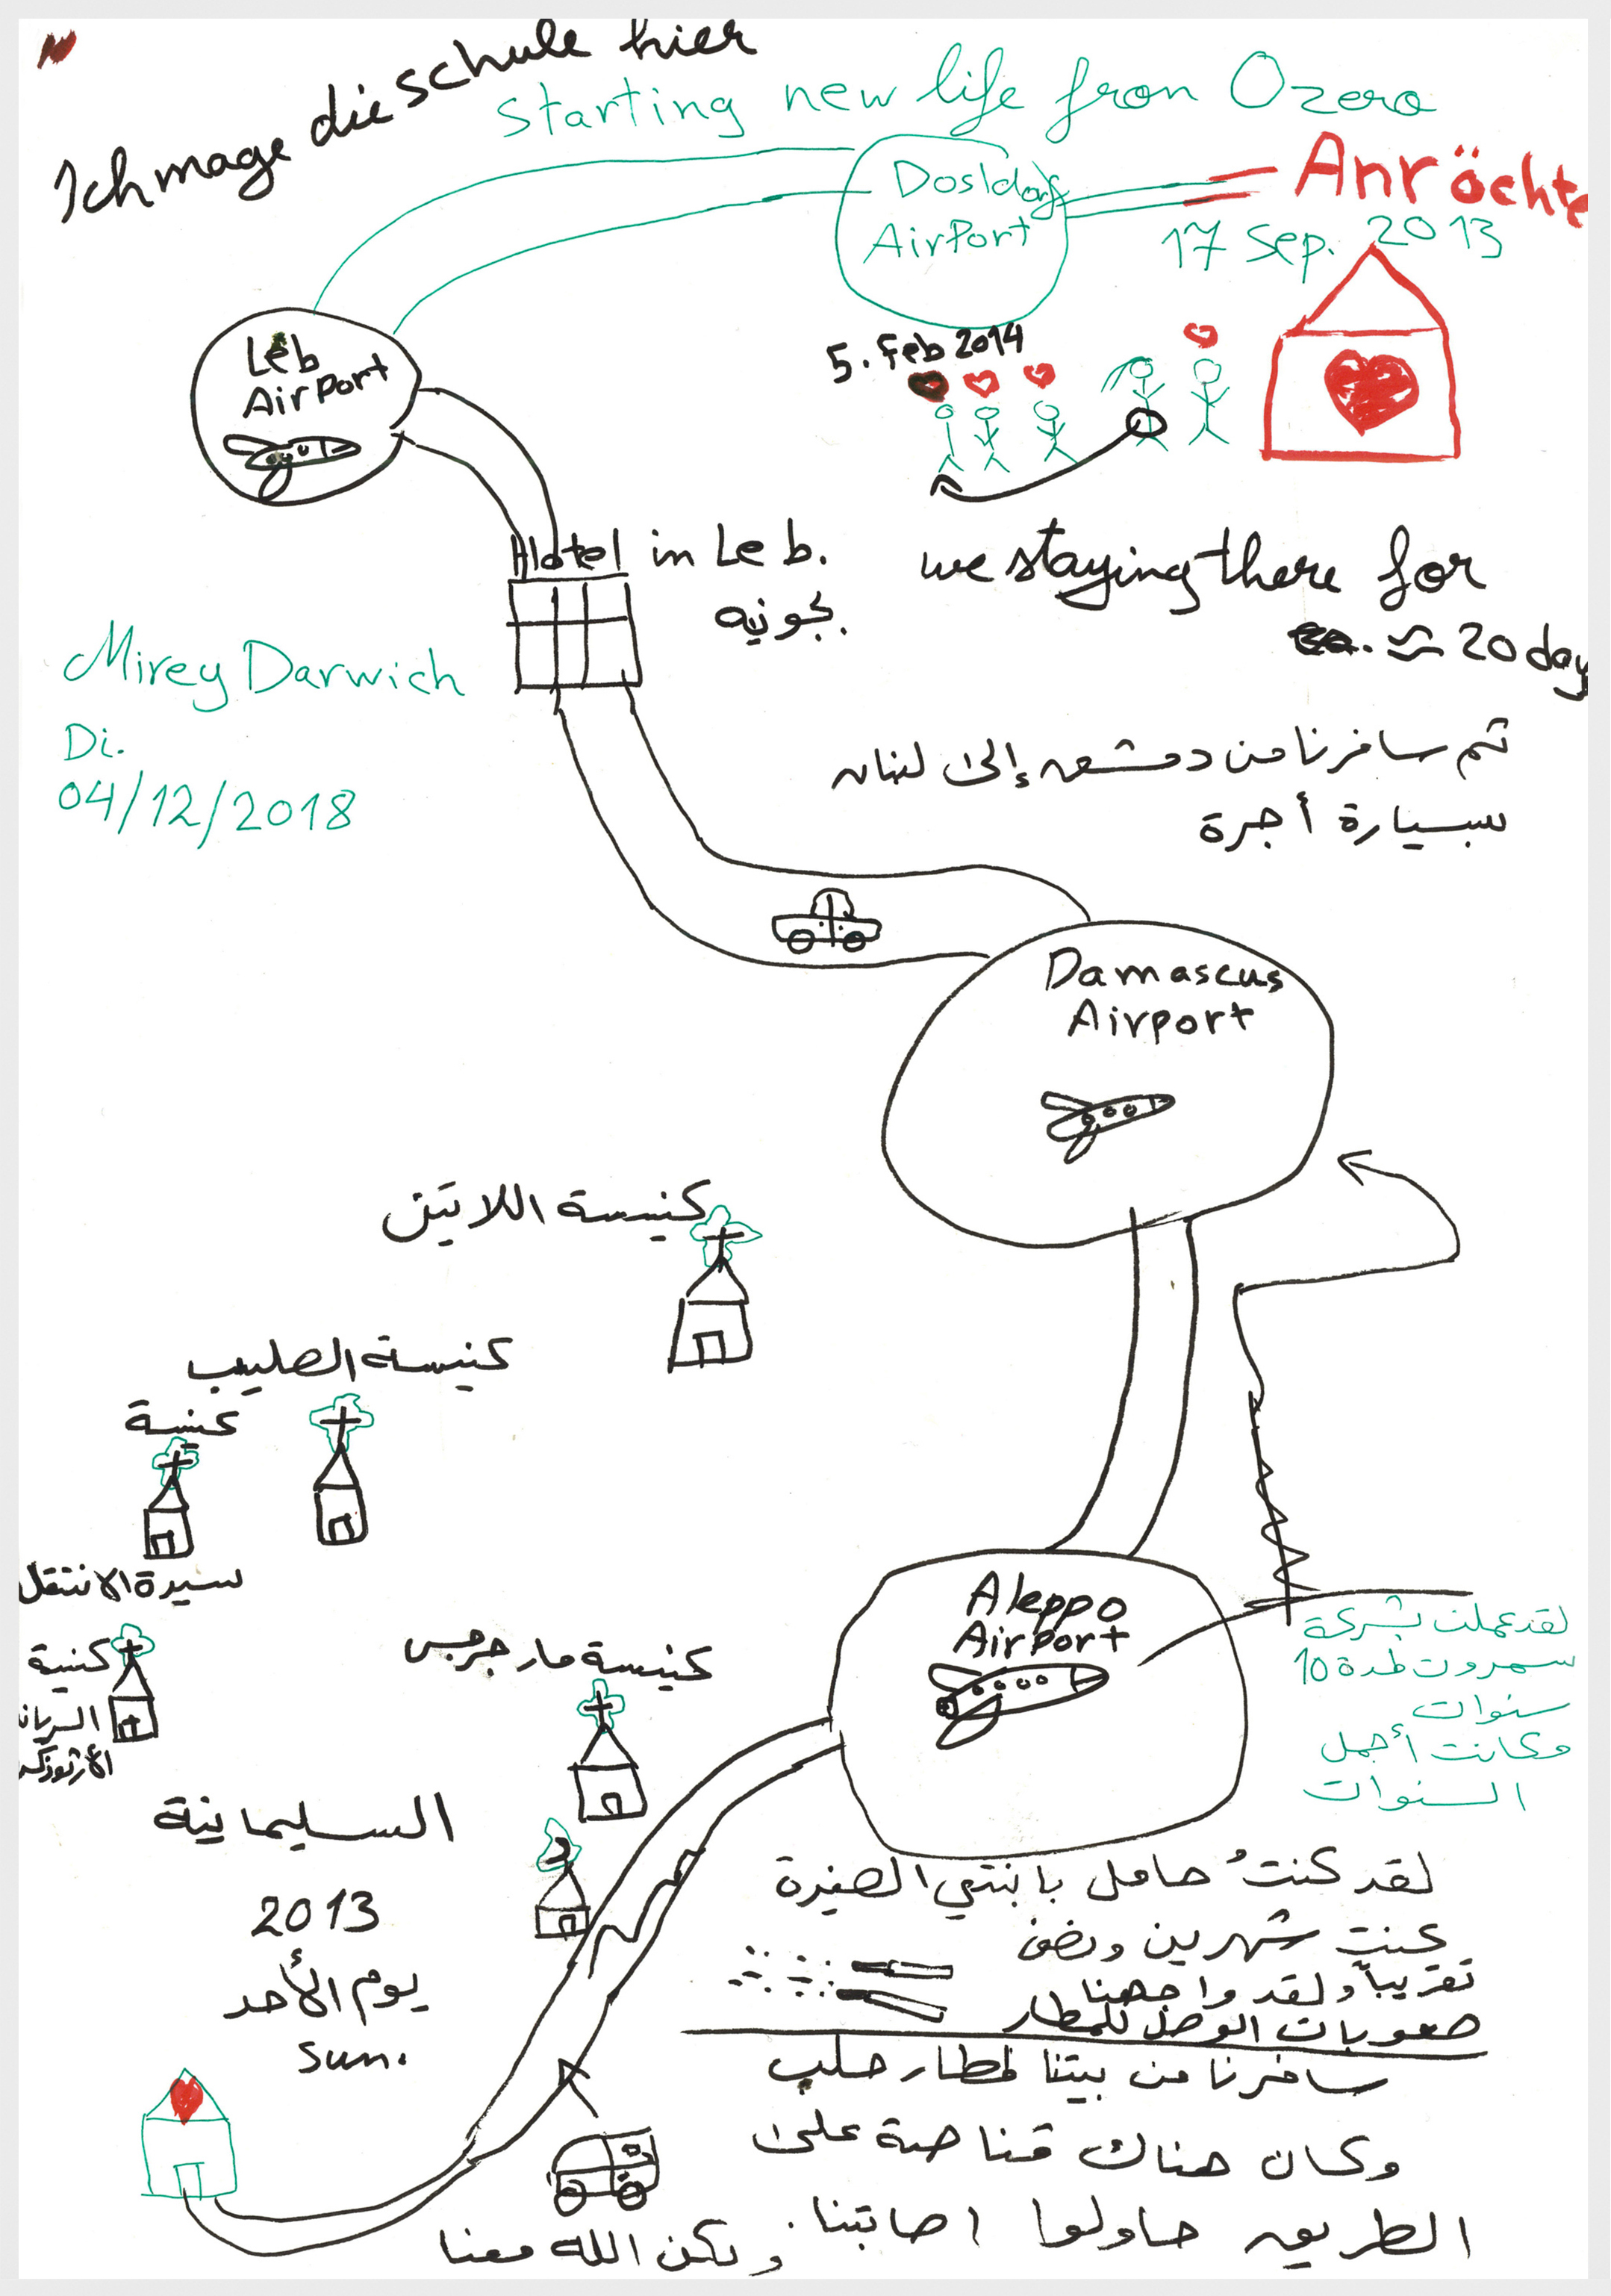 Mirey Darwich drew her journey from Aleppo, Syria, which she fled with her family. They now live in Anröchte, Germany